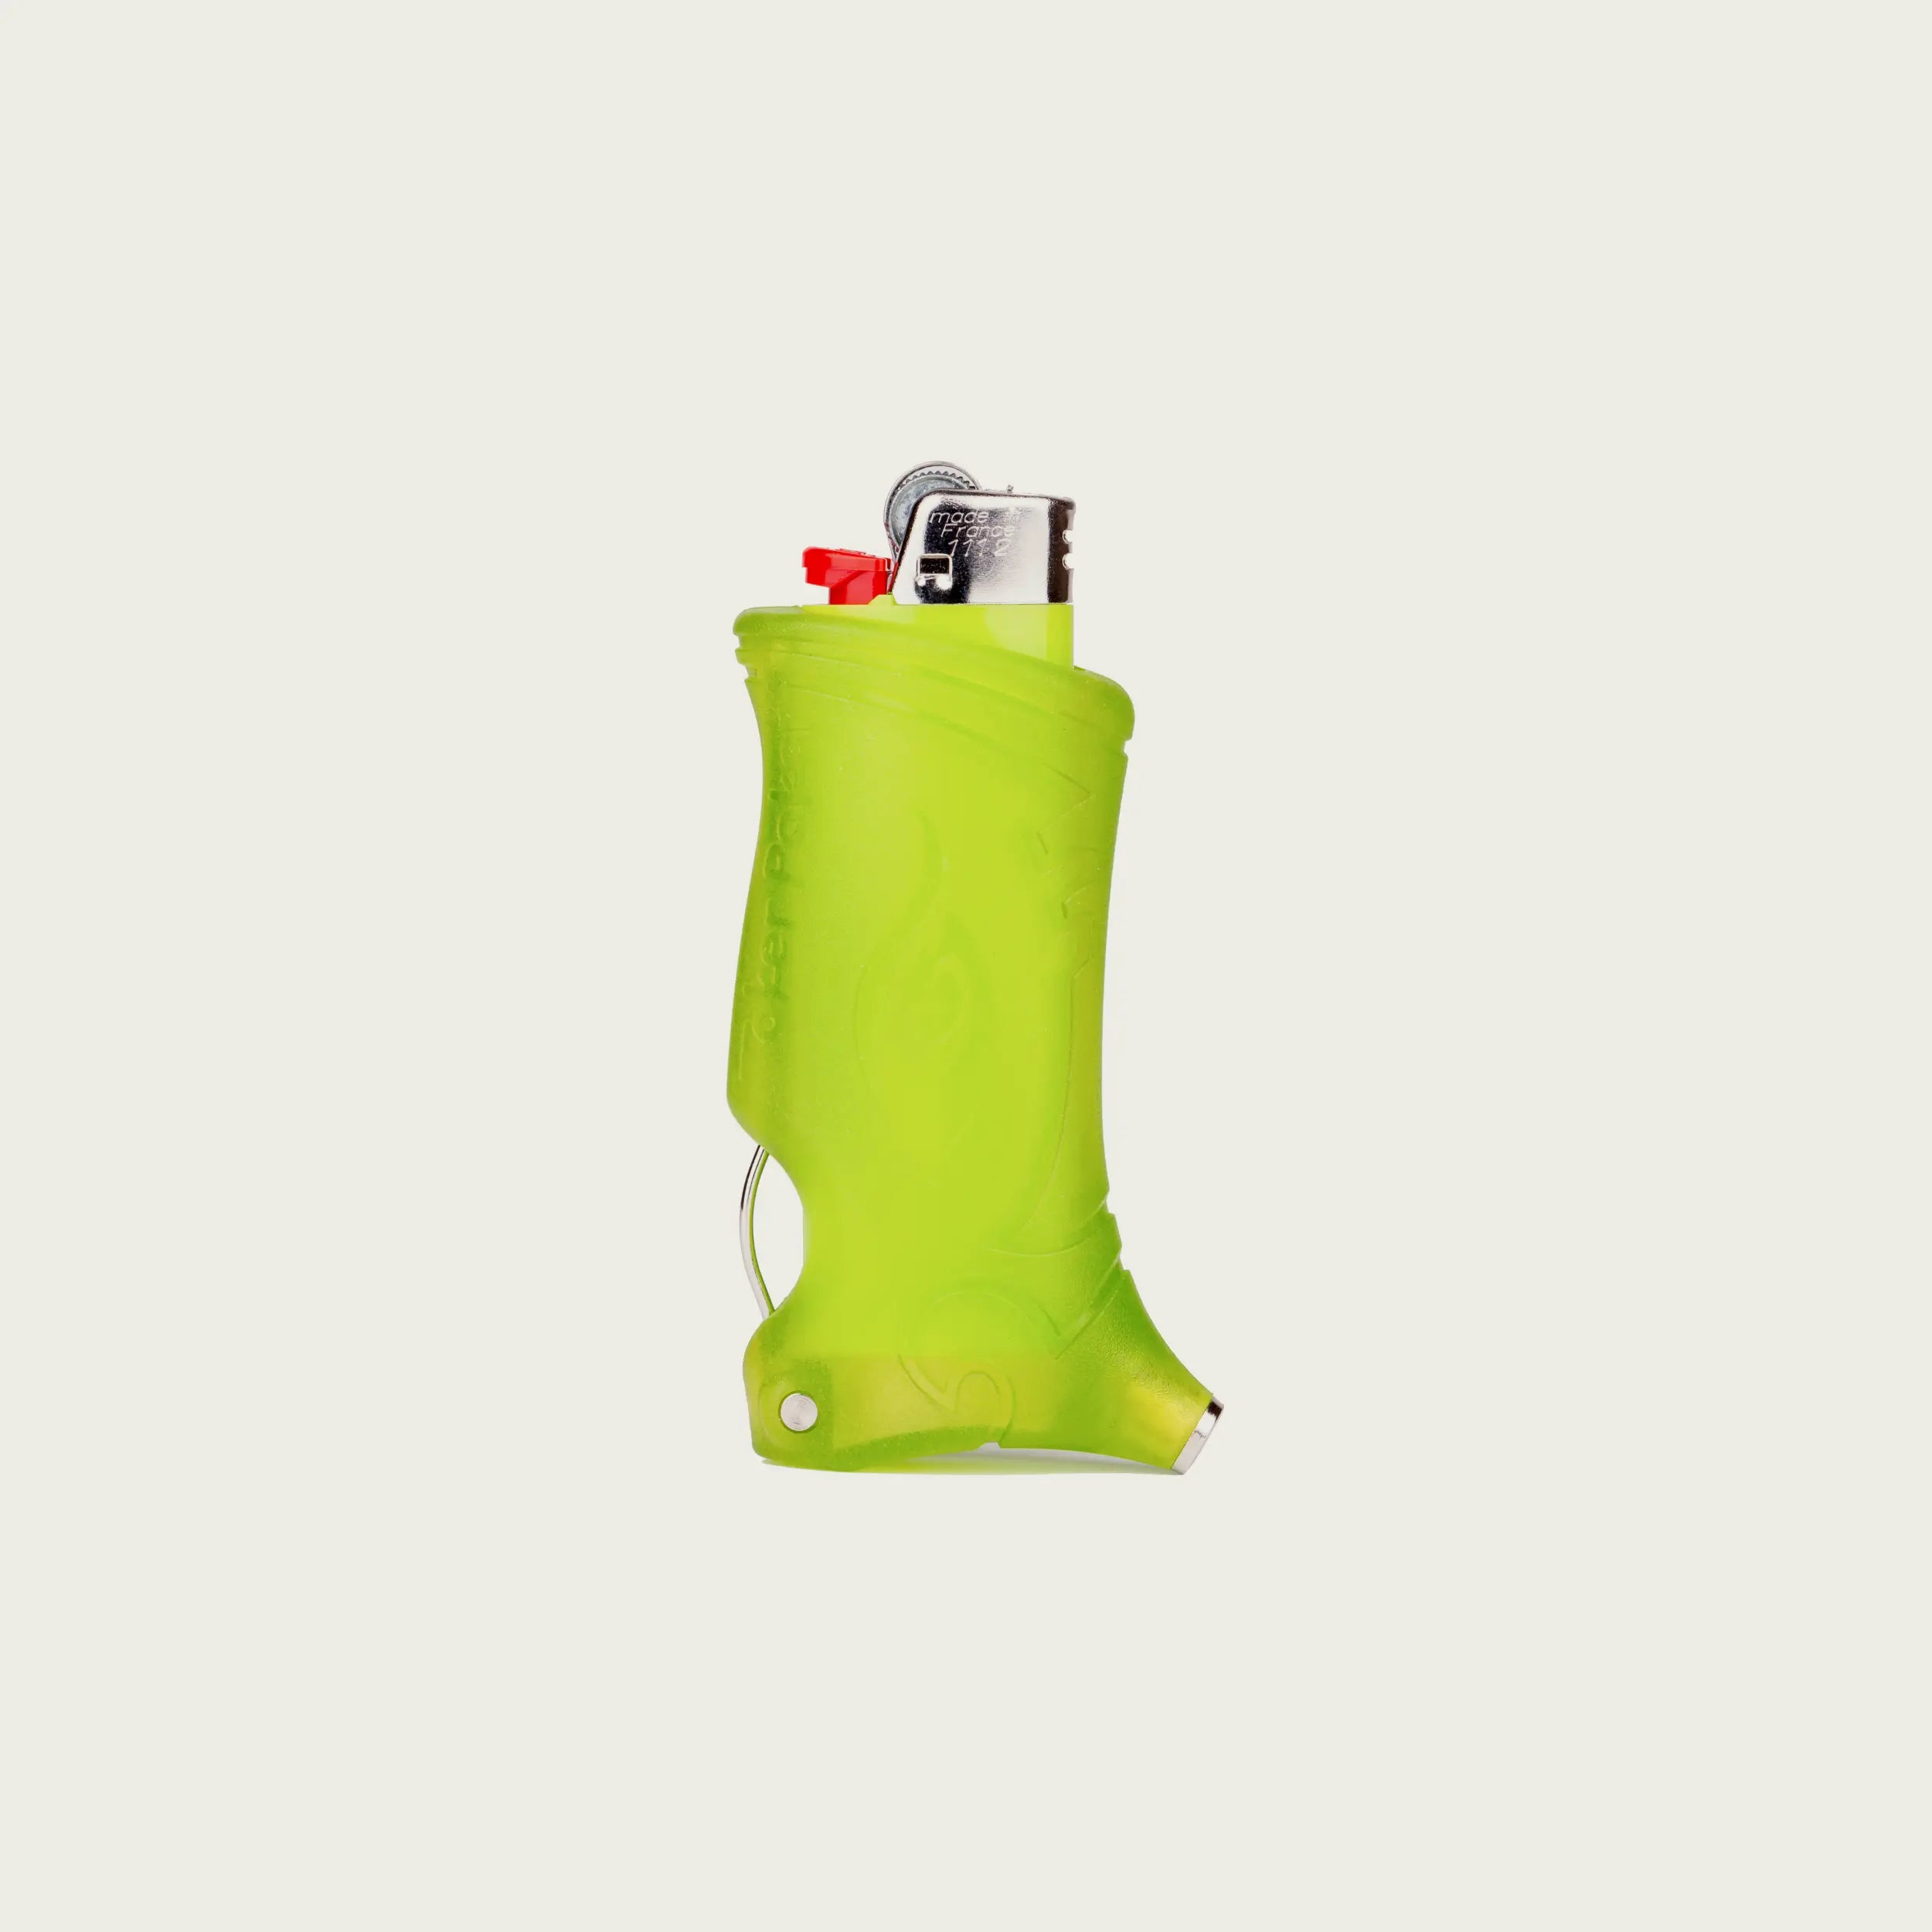 Convenient tool for smokers, featuring a glow-in-the-dark design and BIC lighter integration